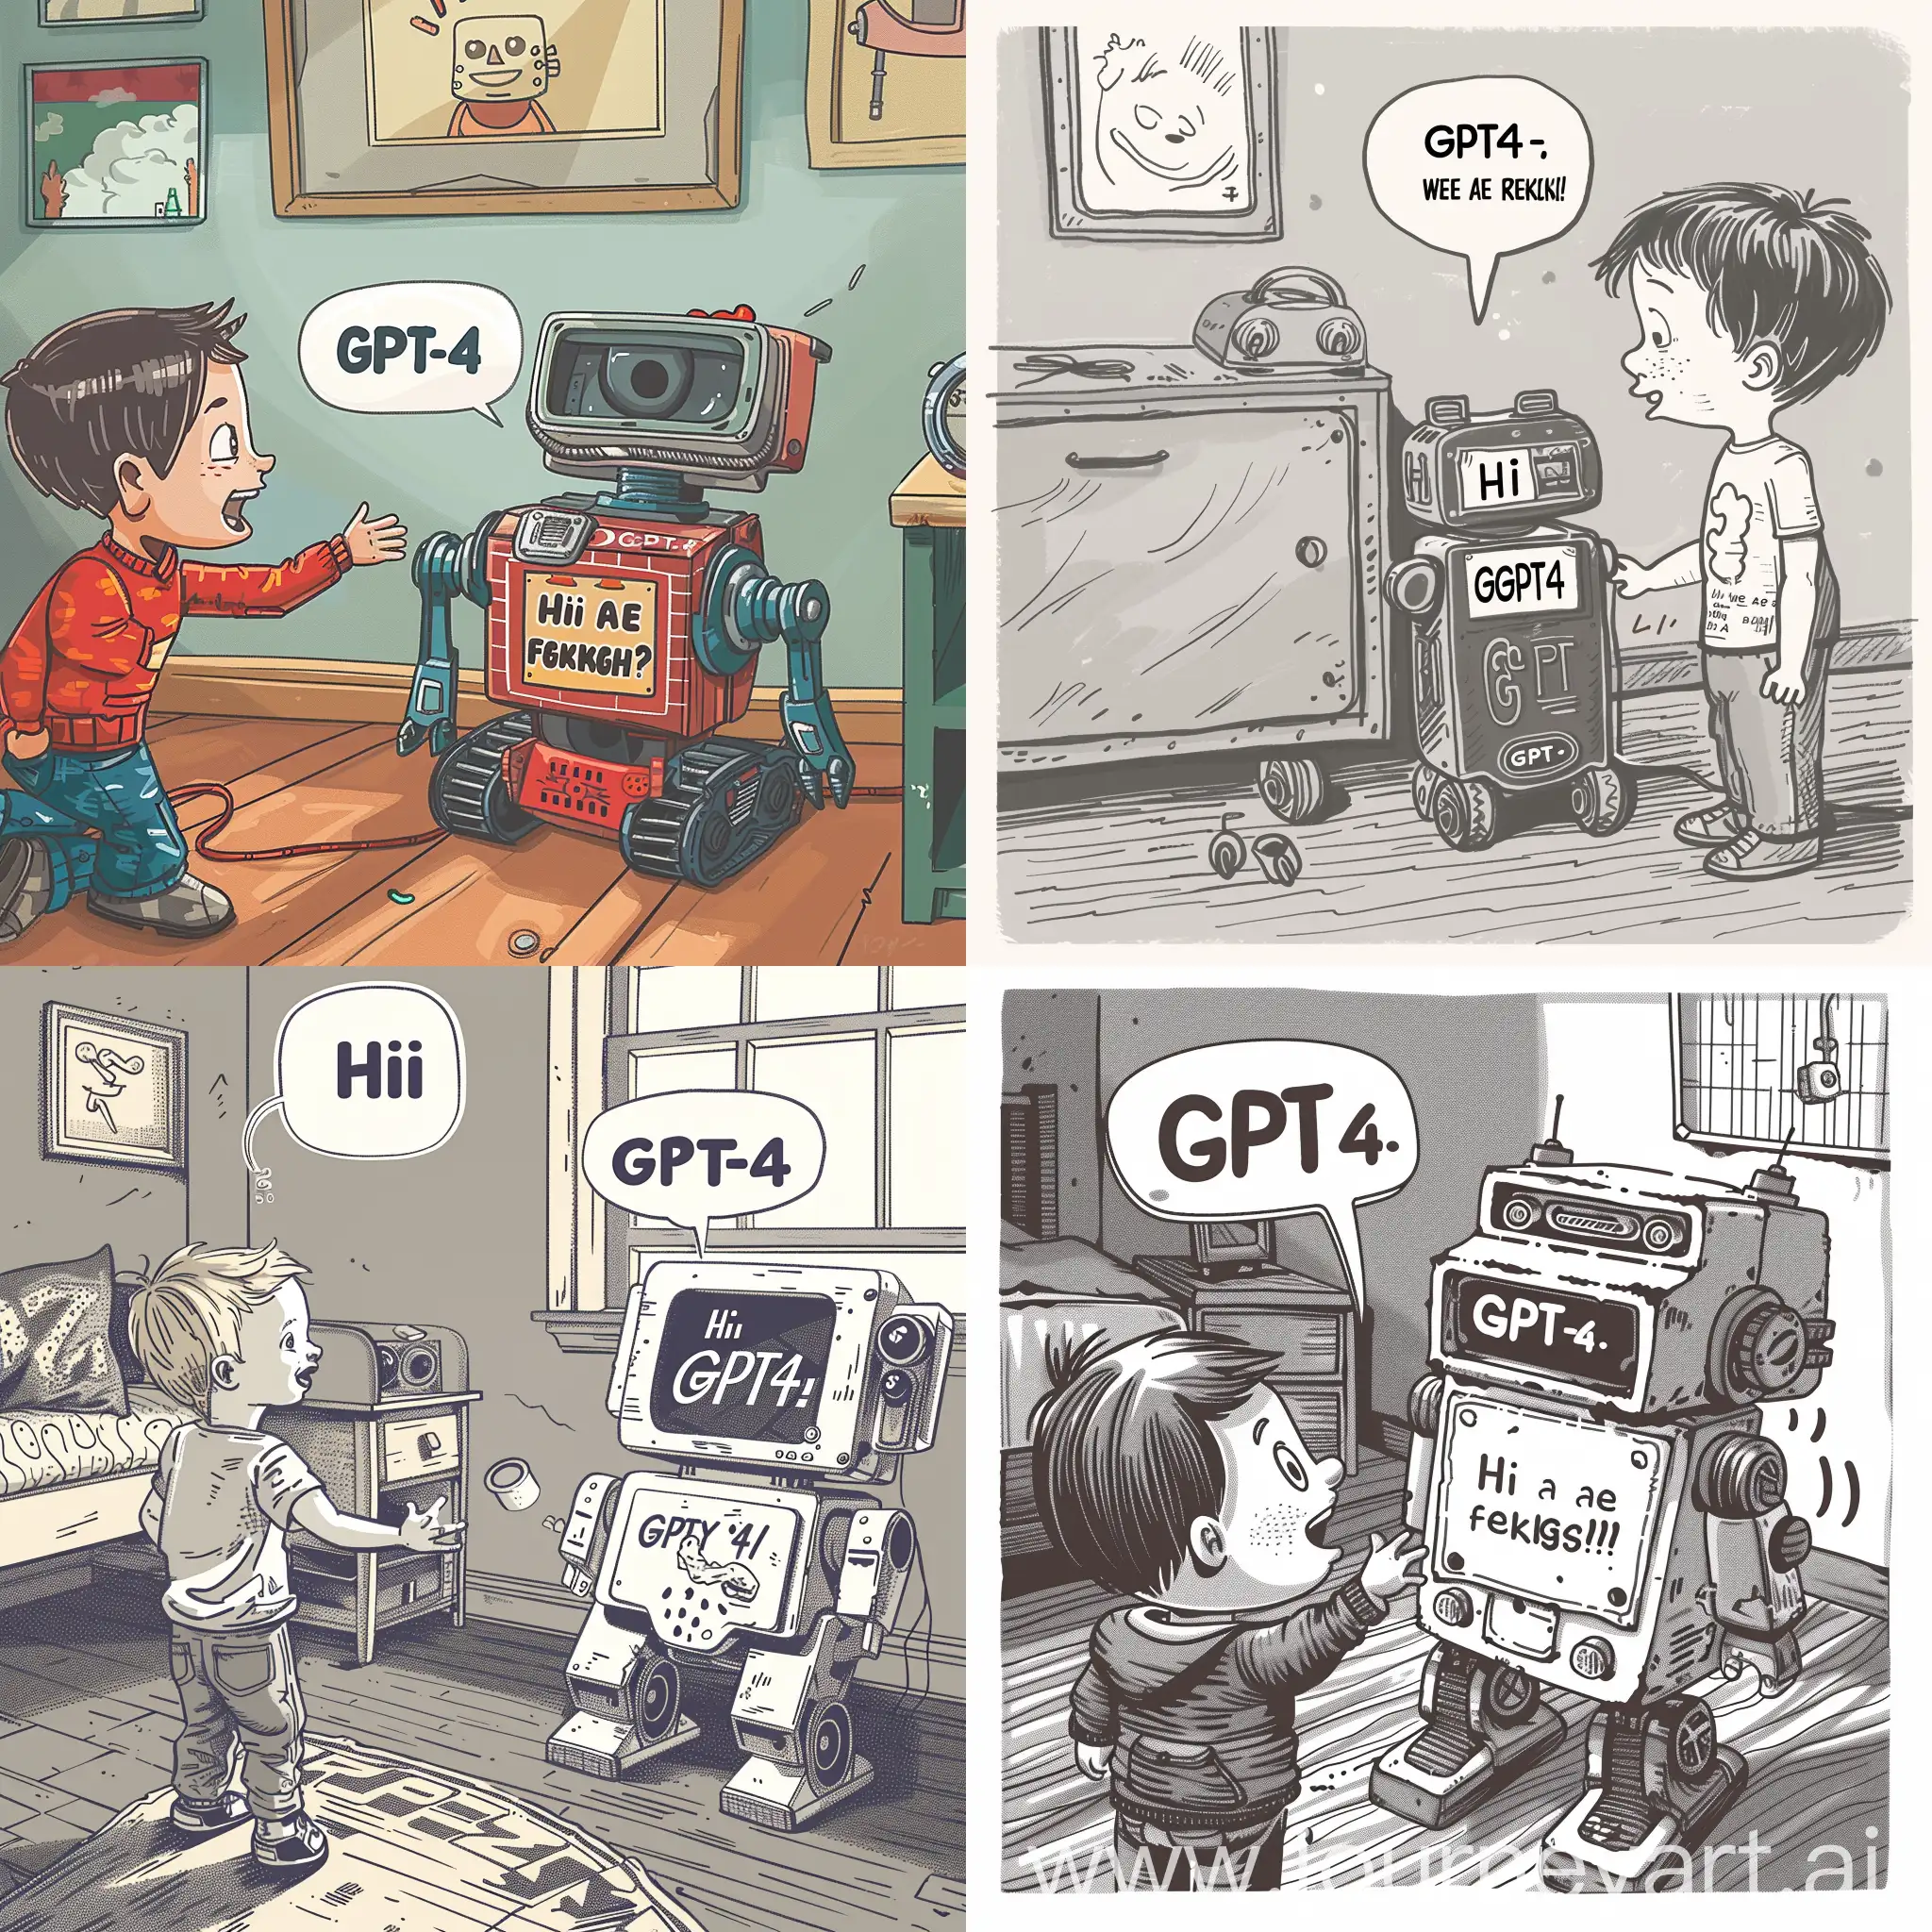 Child-Bonding-with-GPT4-Robot-in-Cozy-American-MiddleClass-Room